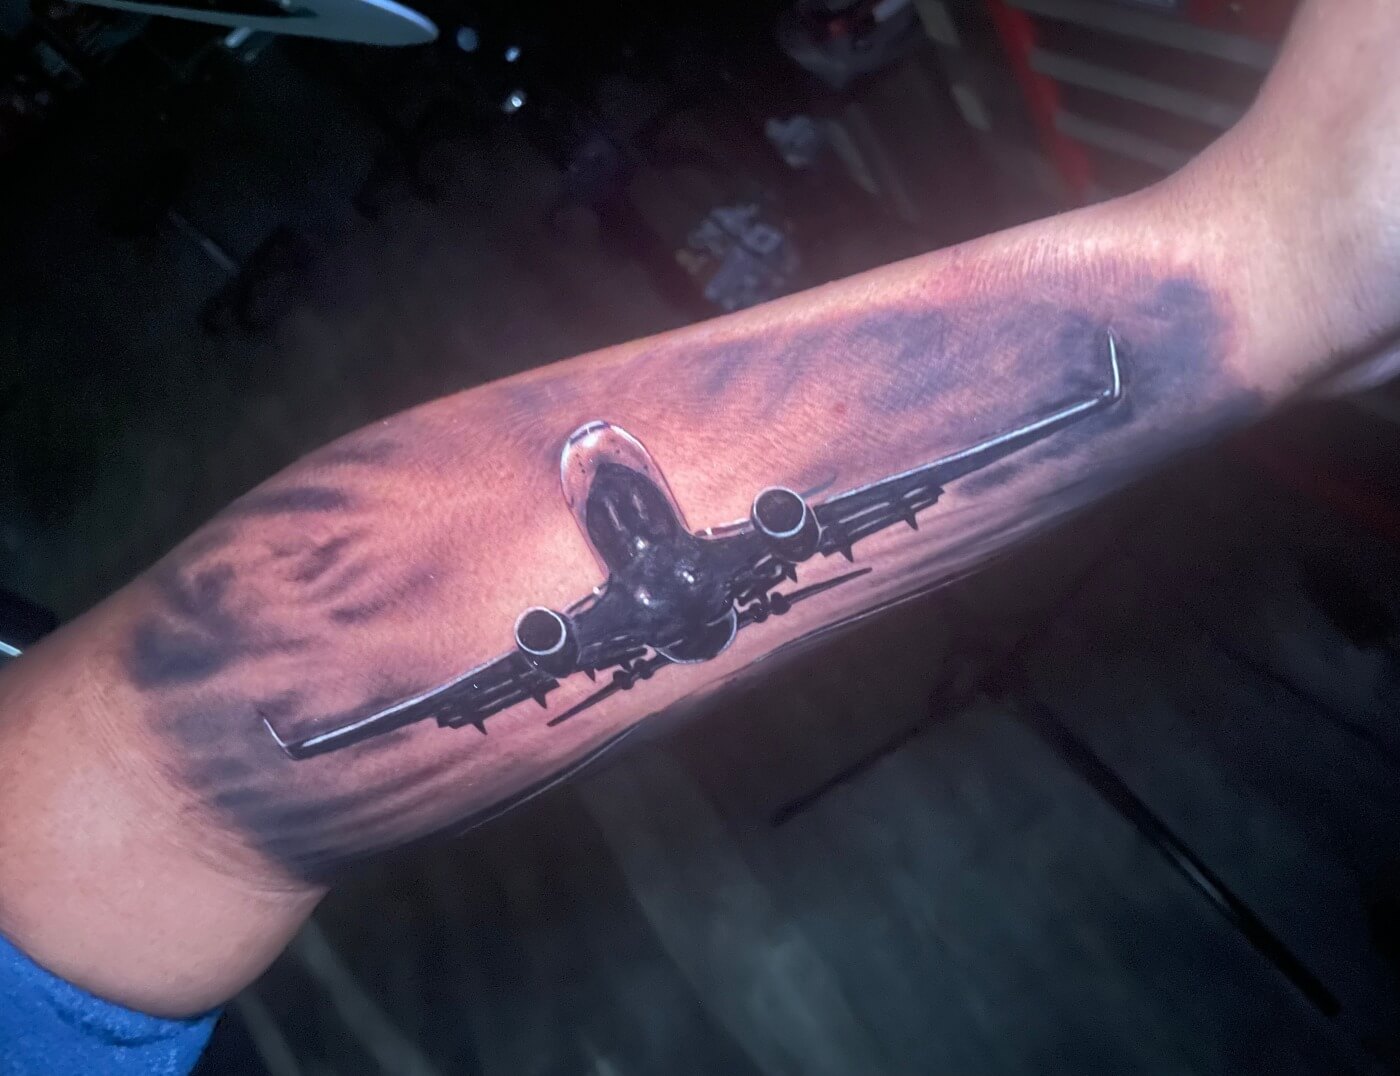 Commercial Jet Airline Colored Photo-realistic Tattoo by tattooist Terrance Sawyer At Iron Palm Tattoos In Downtown Atlanta. Call 404-973-7828 or stop by for a free consultation.